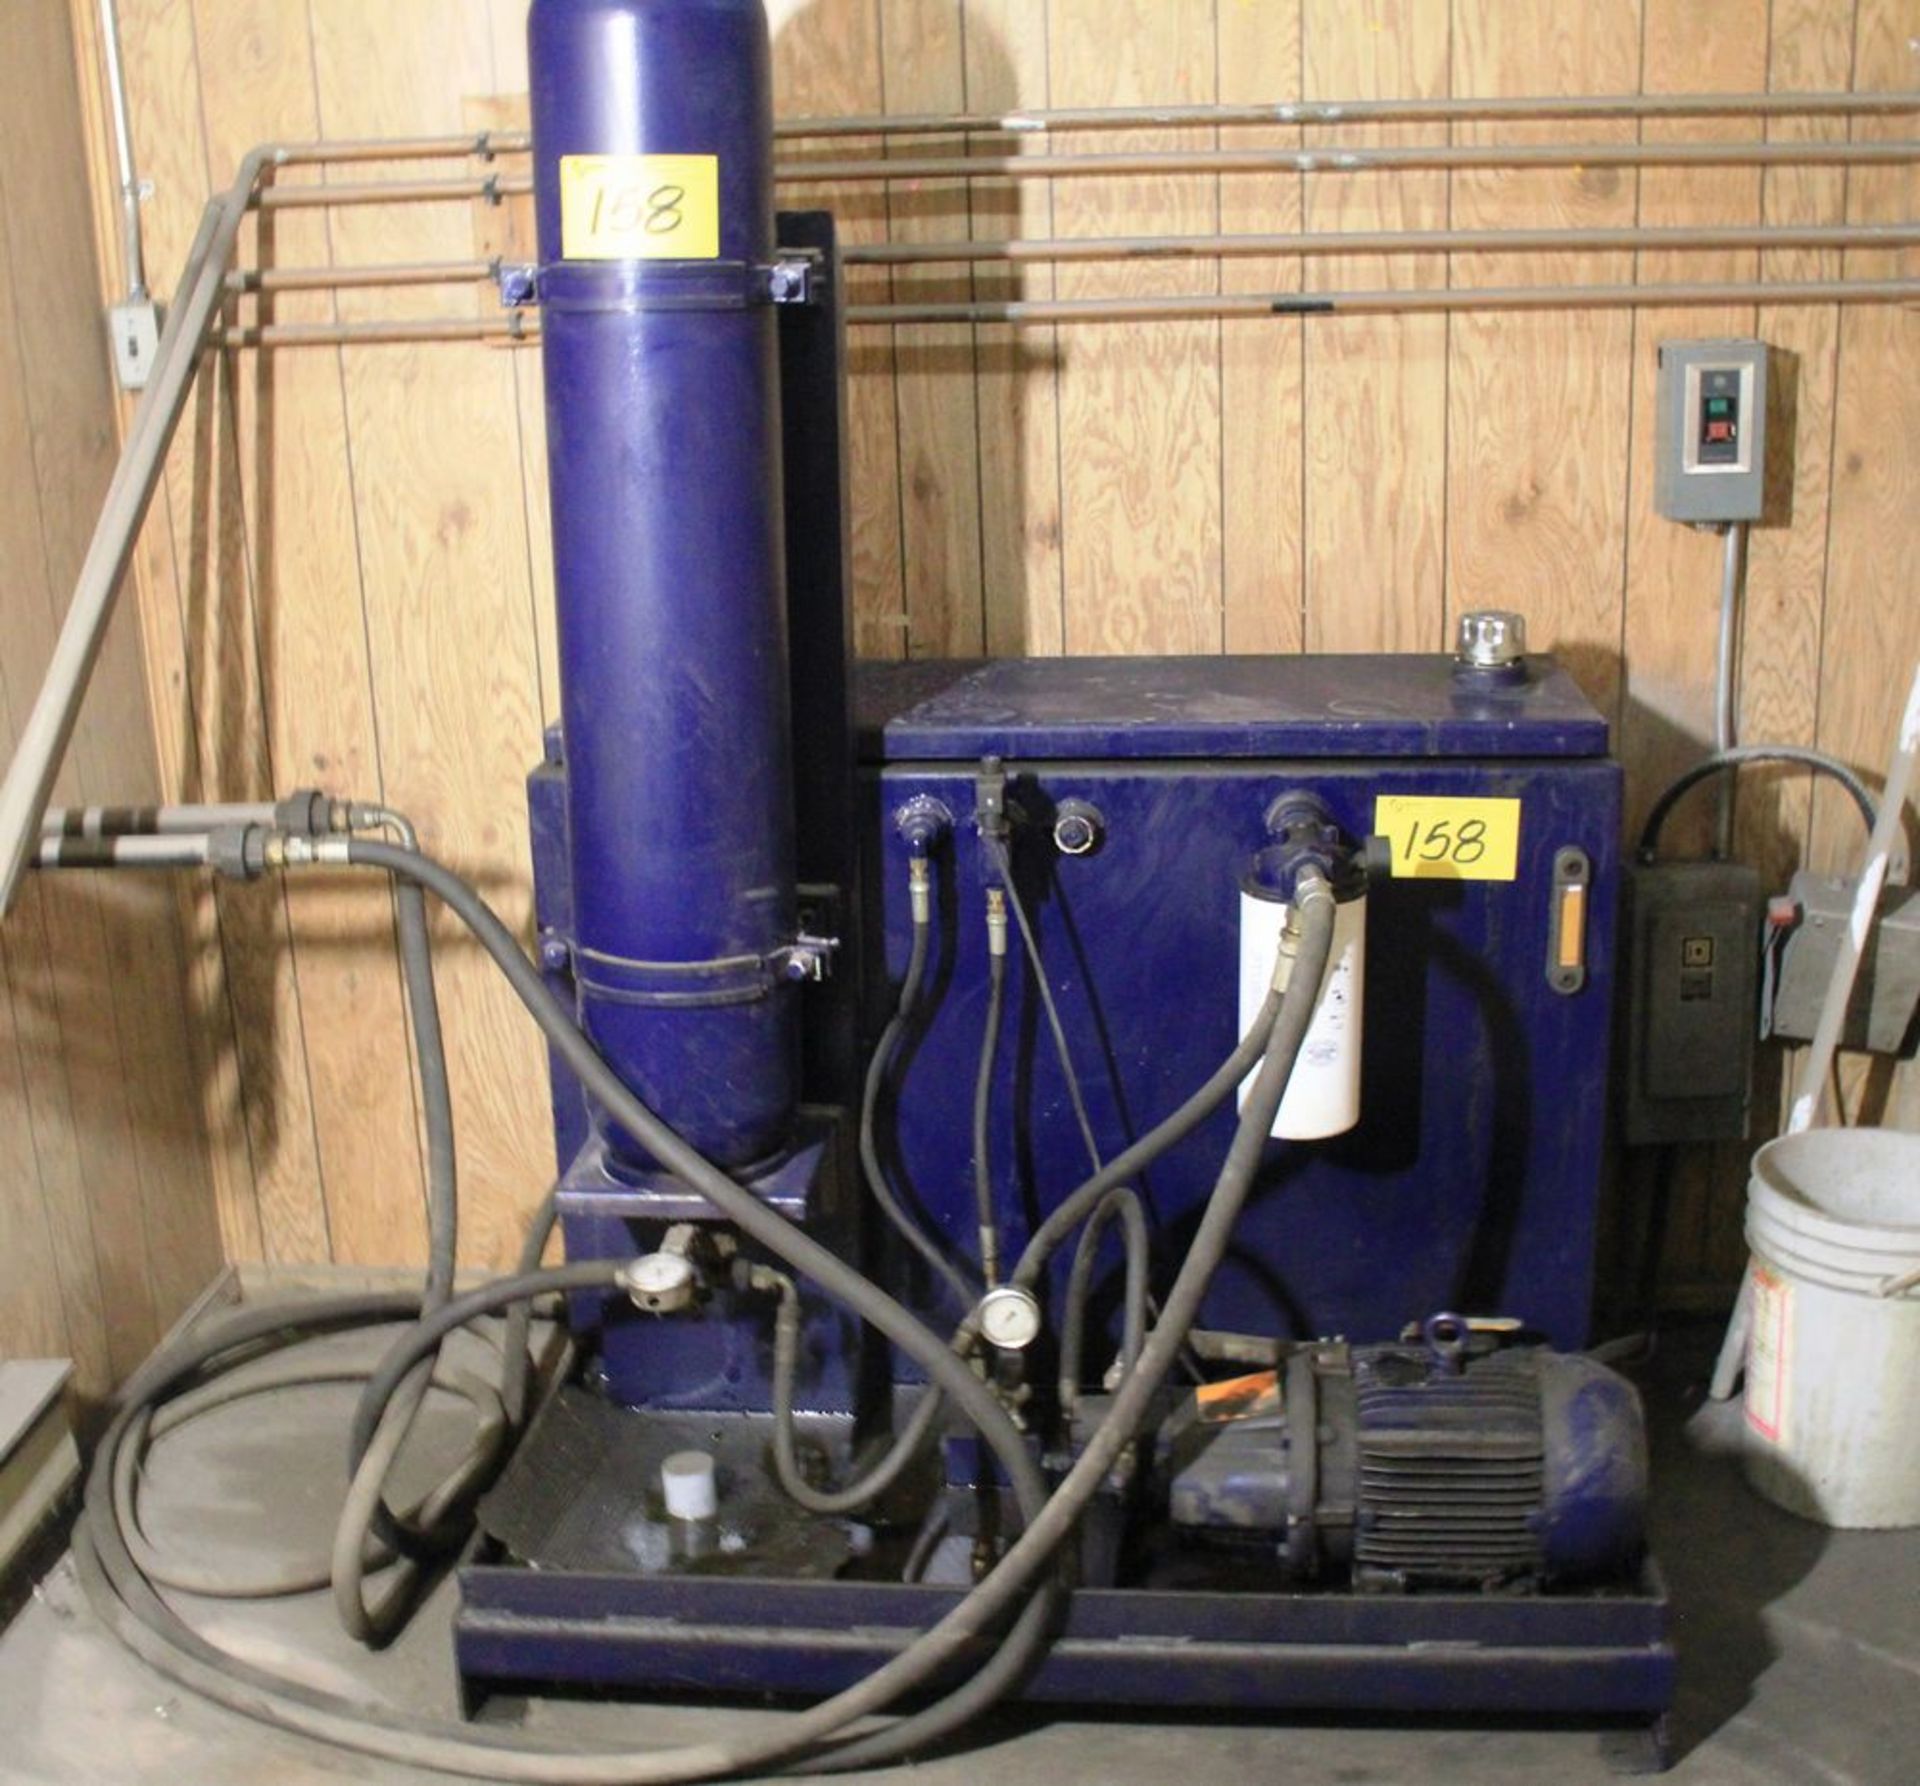 HYDRAULIC POWER PACK (NOTE: UNIT HOOKED INTO THE IRCO WELDING POSITIONER SYSTEM)